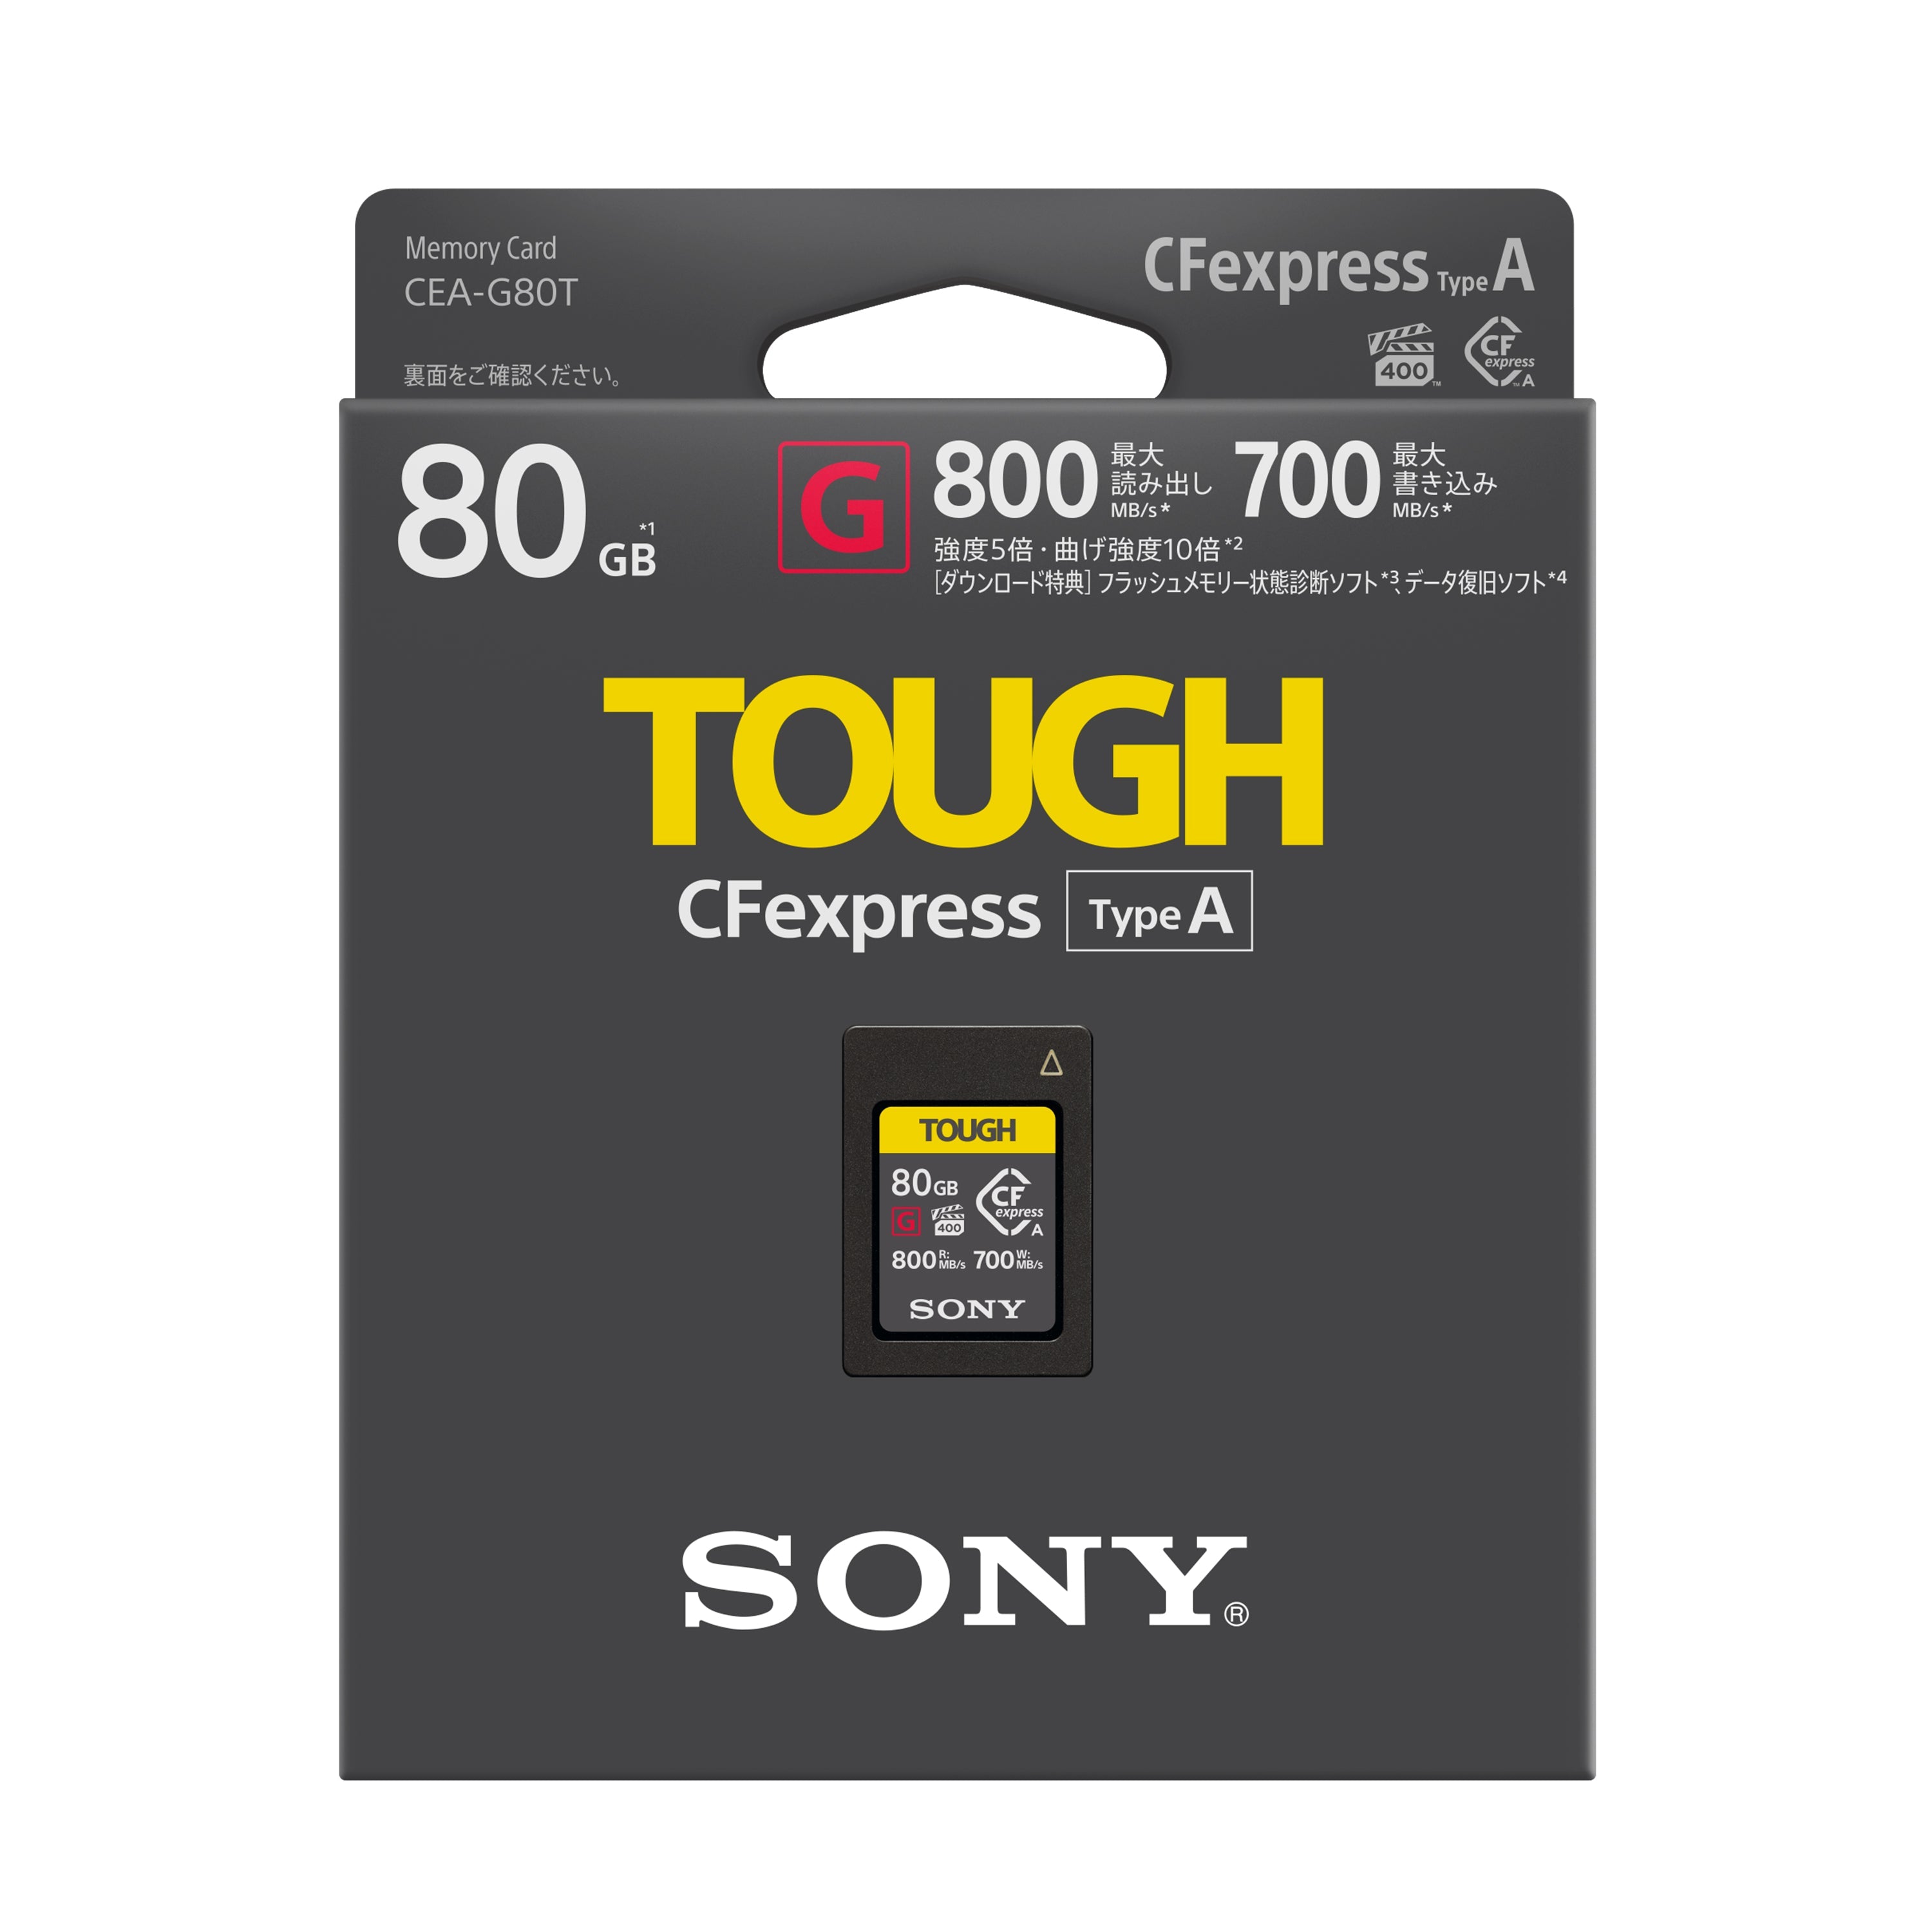 Sony CFexpress Type A G-Series Memory Card - 80GB